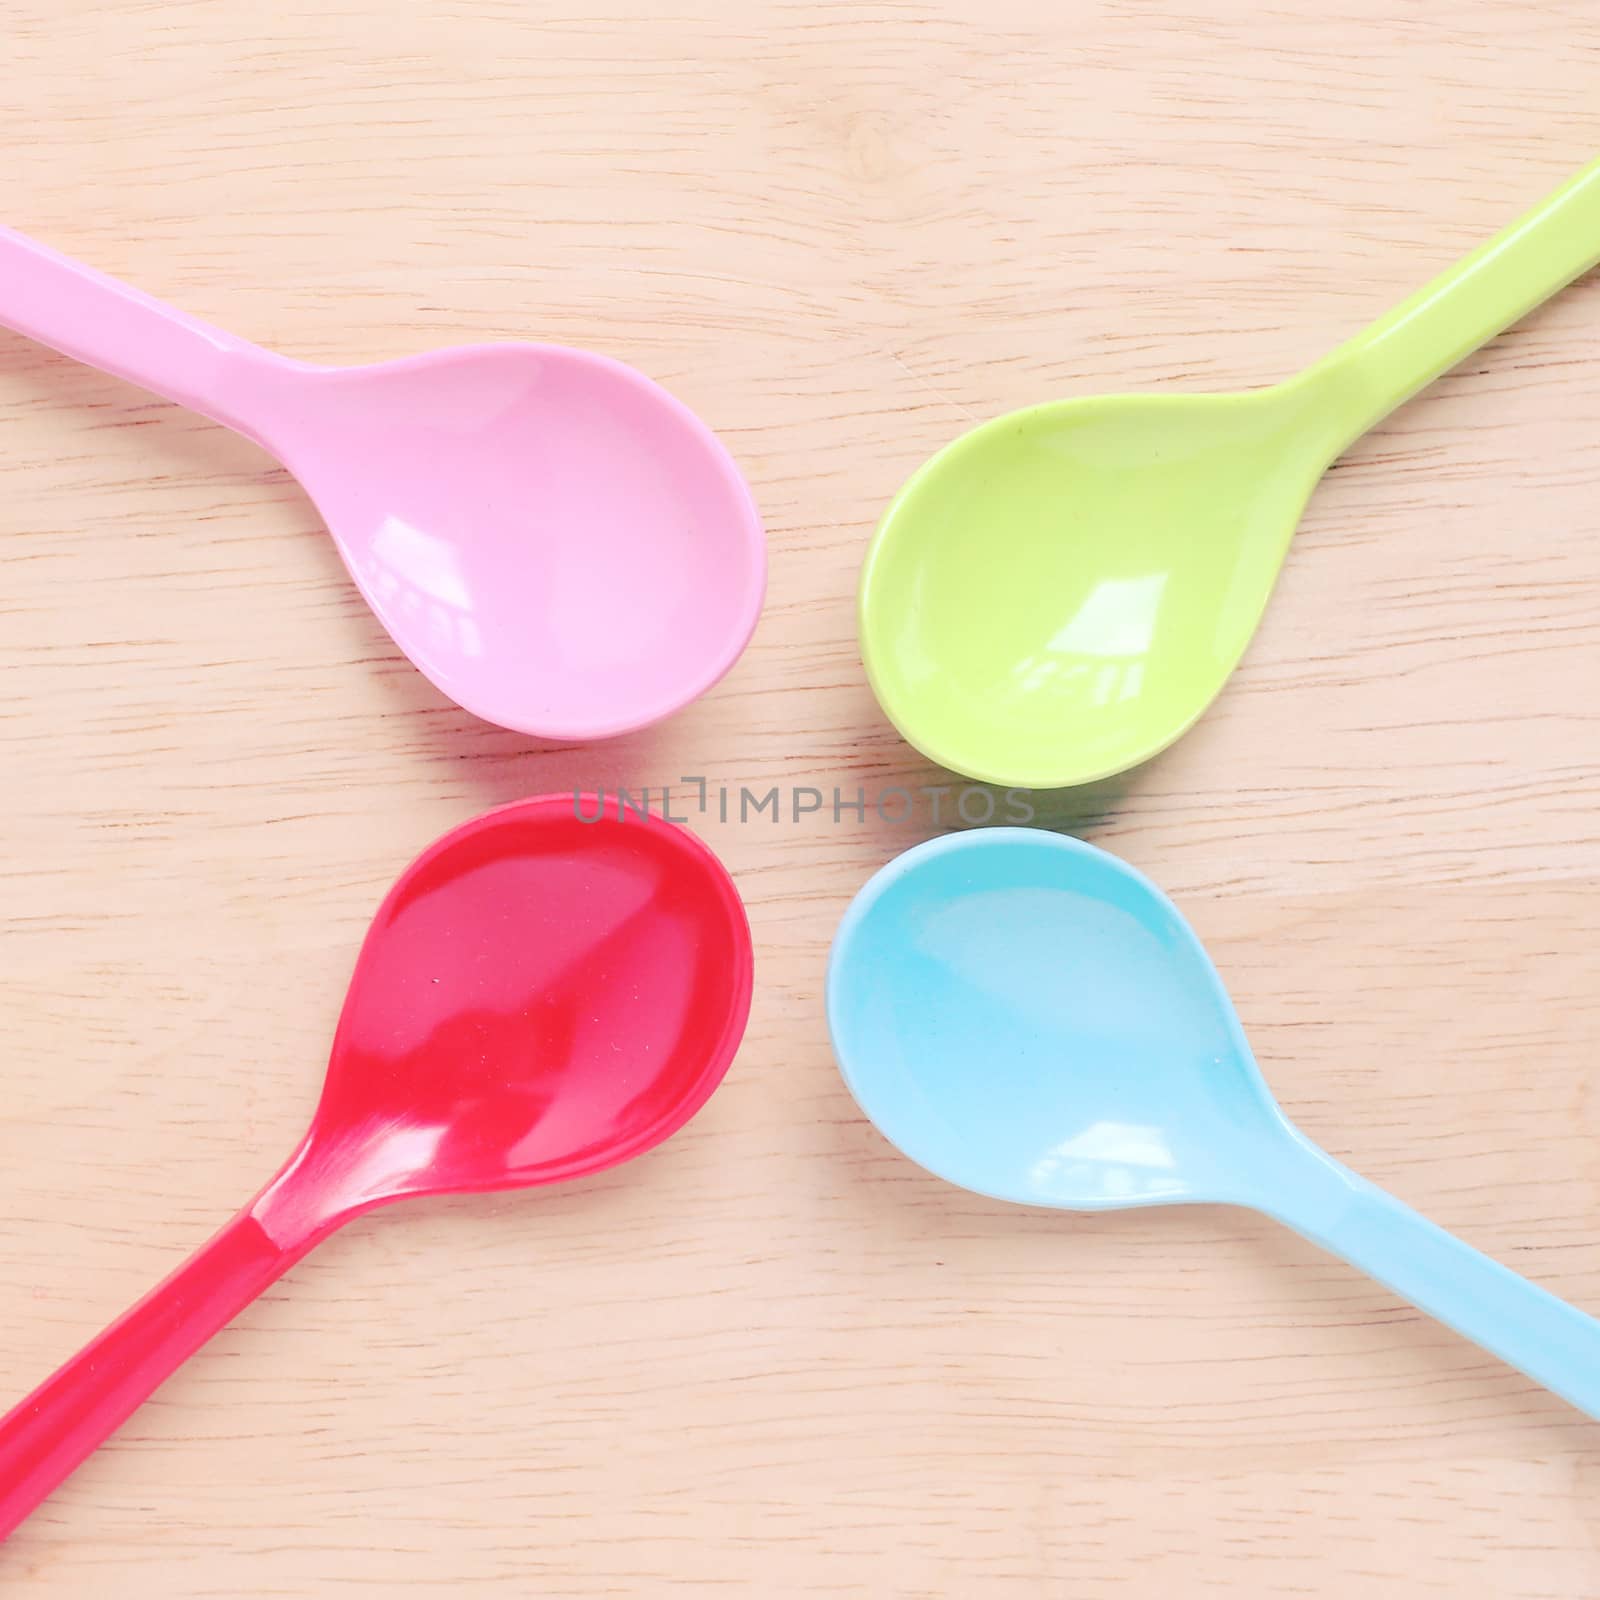 Colorful plastic spoons on wood with retro filter effect